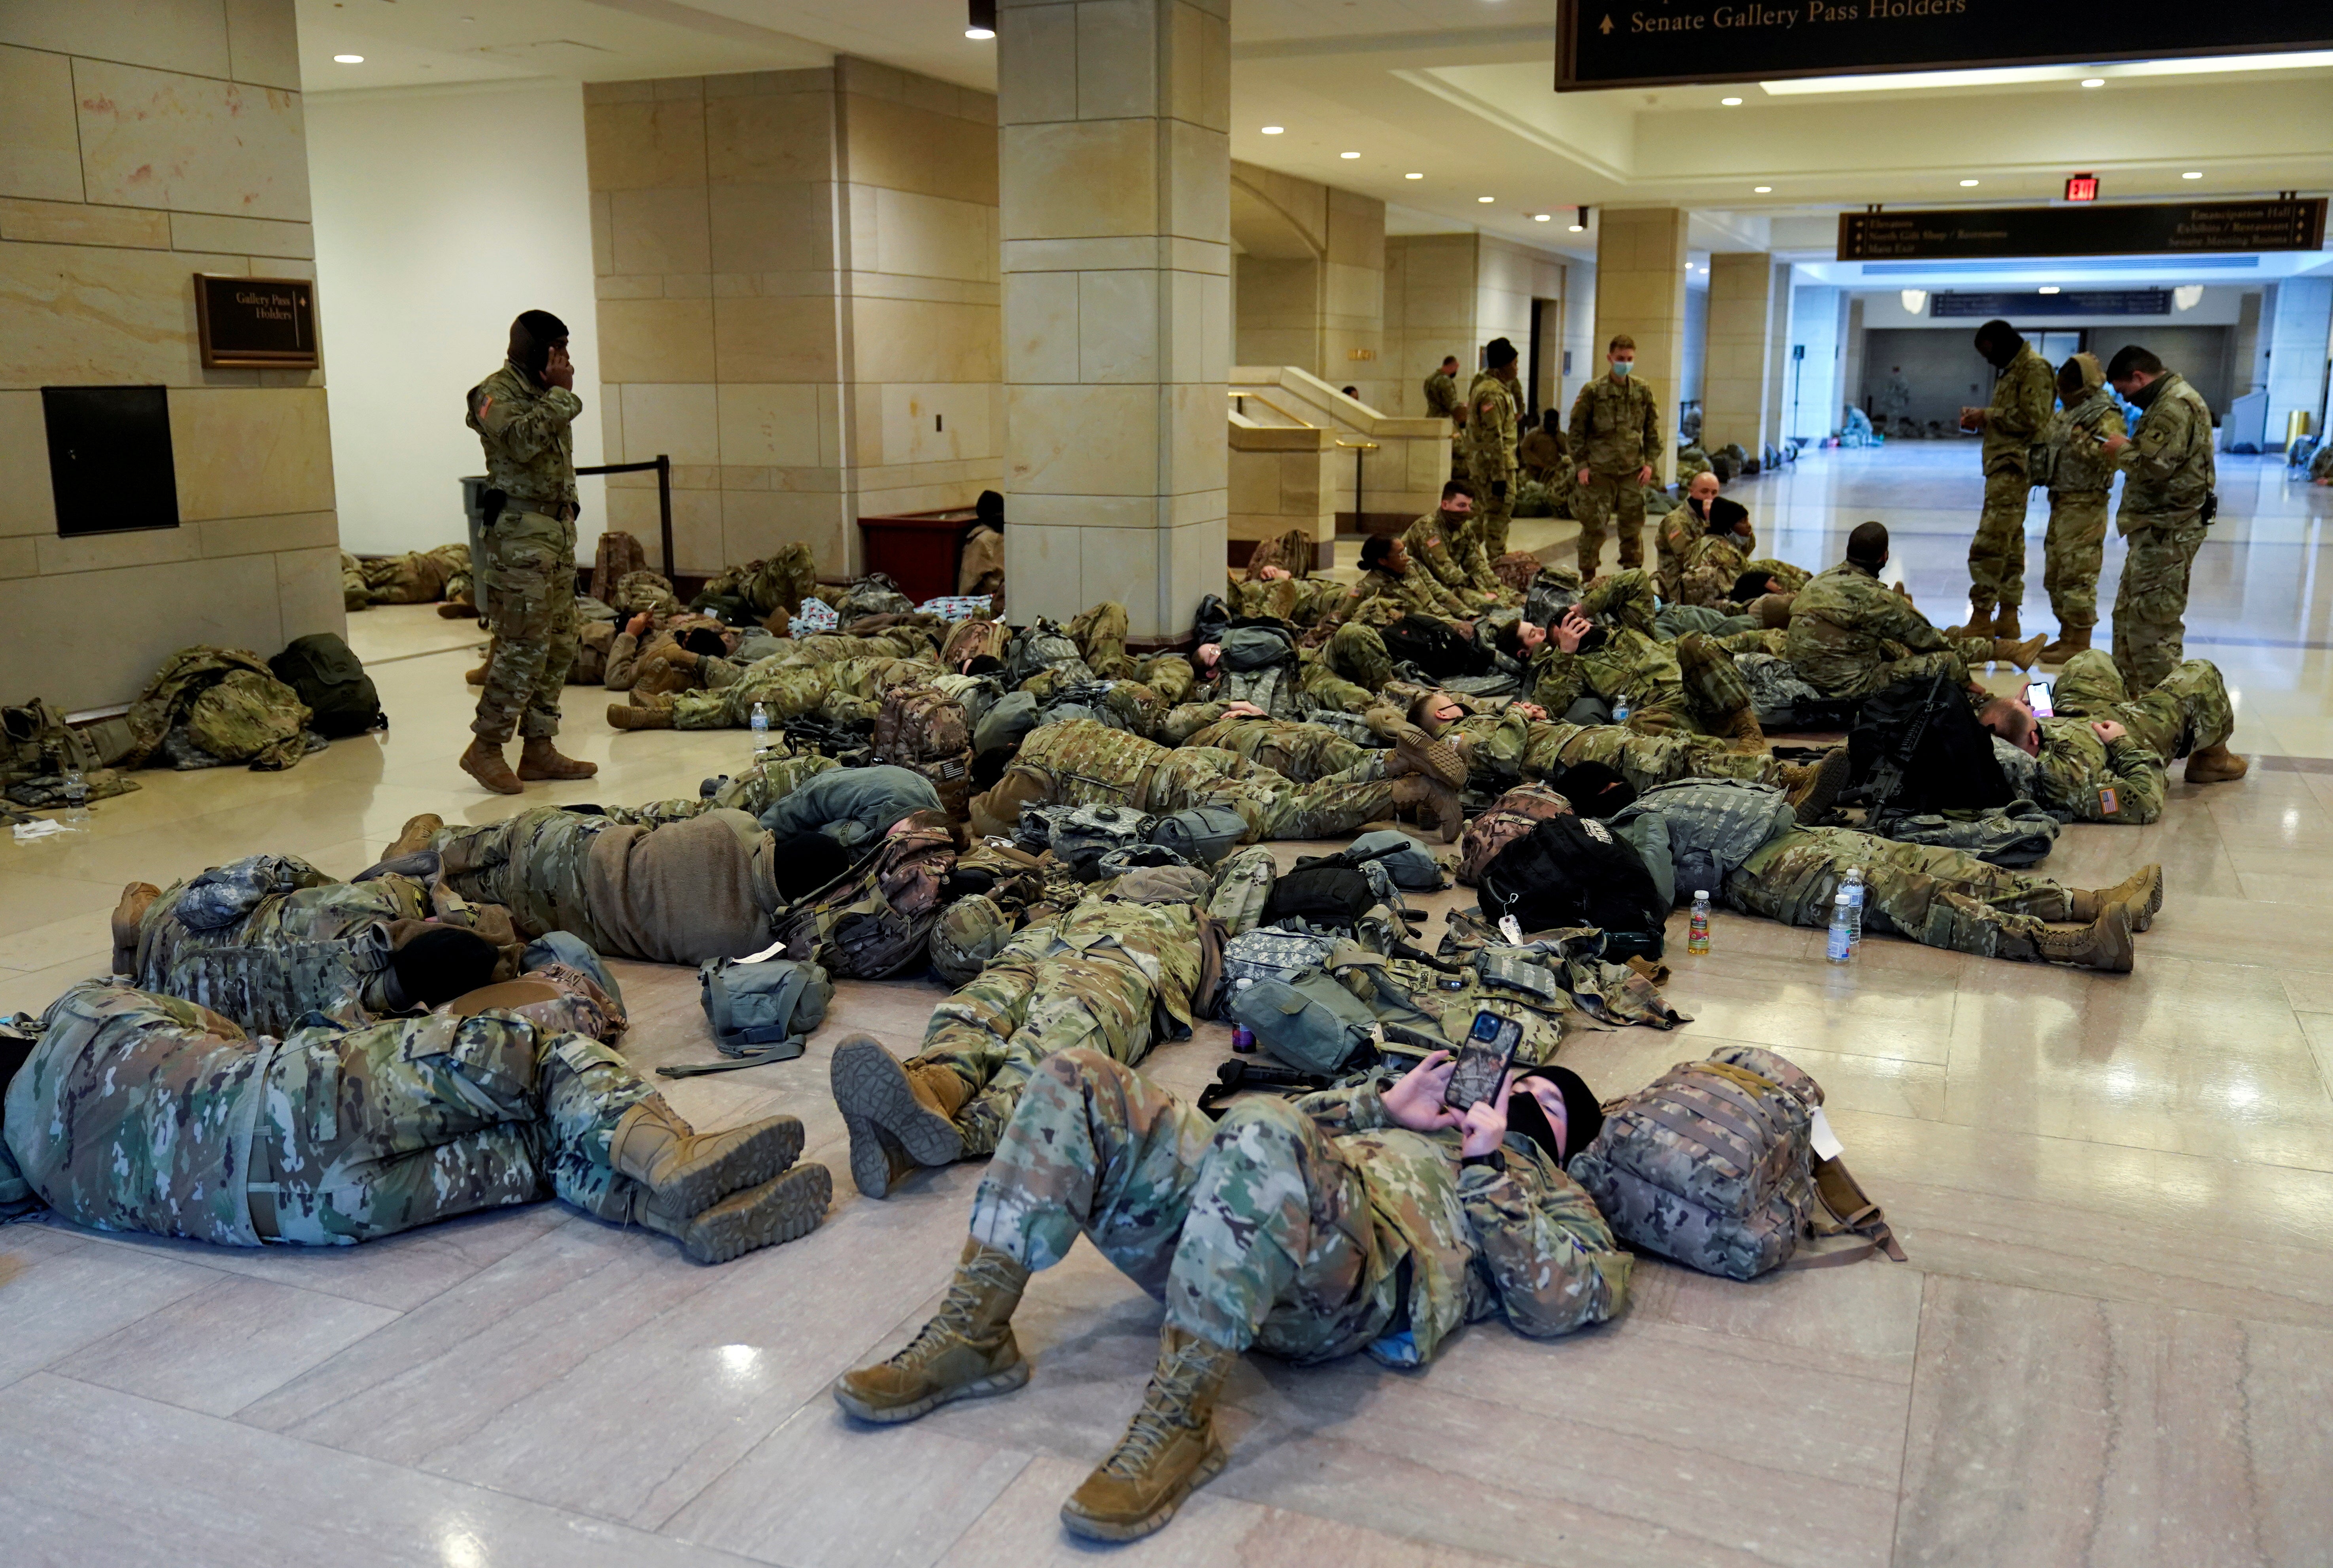 National Guard members sleep in the Capitol Visitor Centre before Democrats begin debating one article of impeachment against Donald Trump